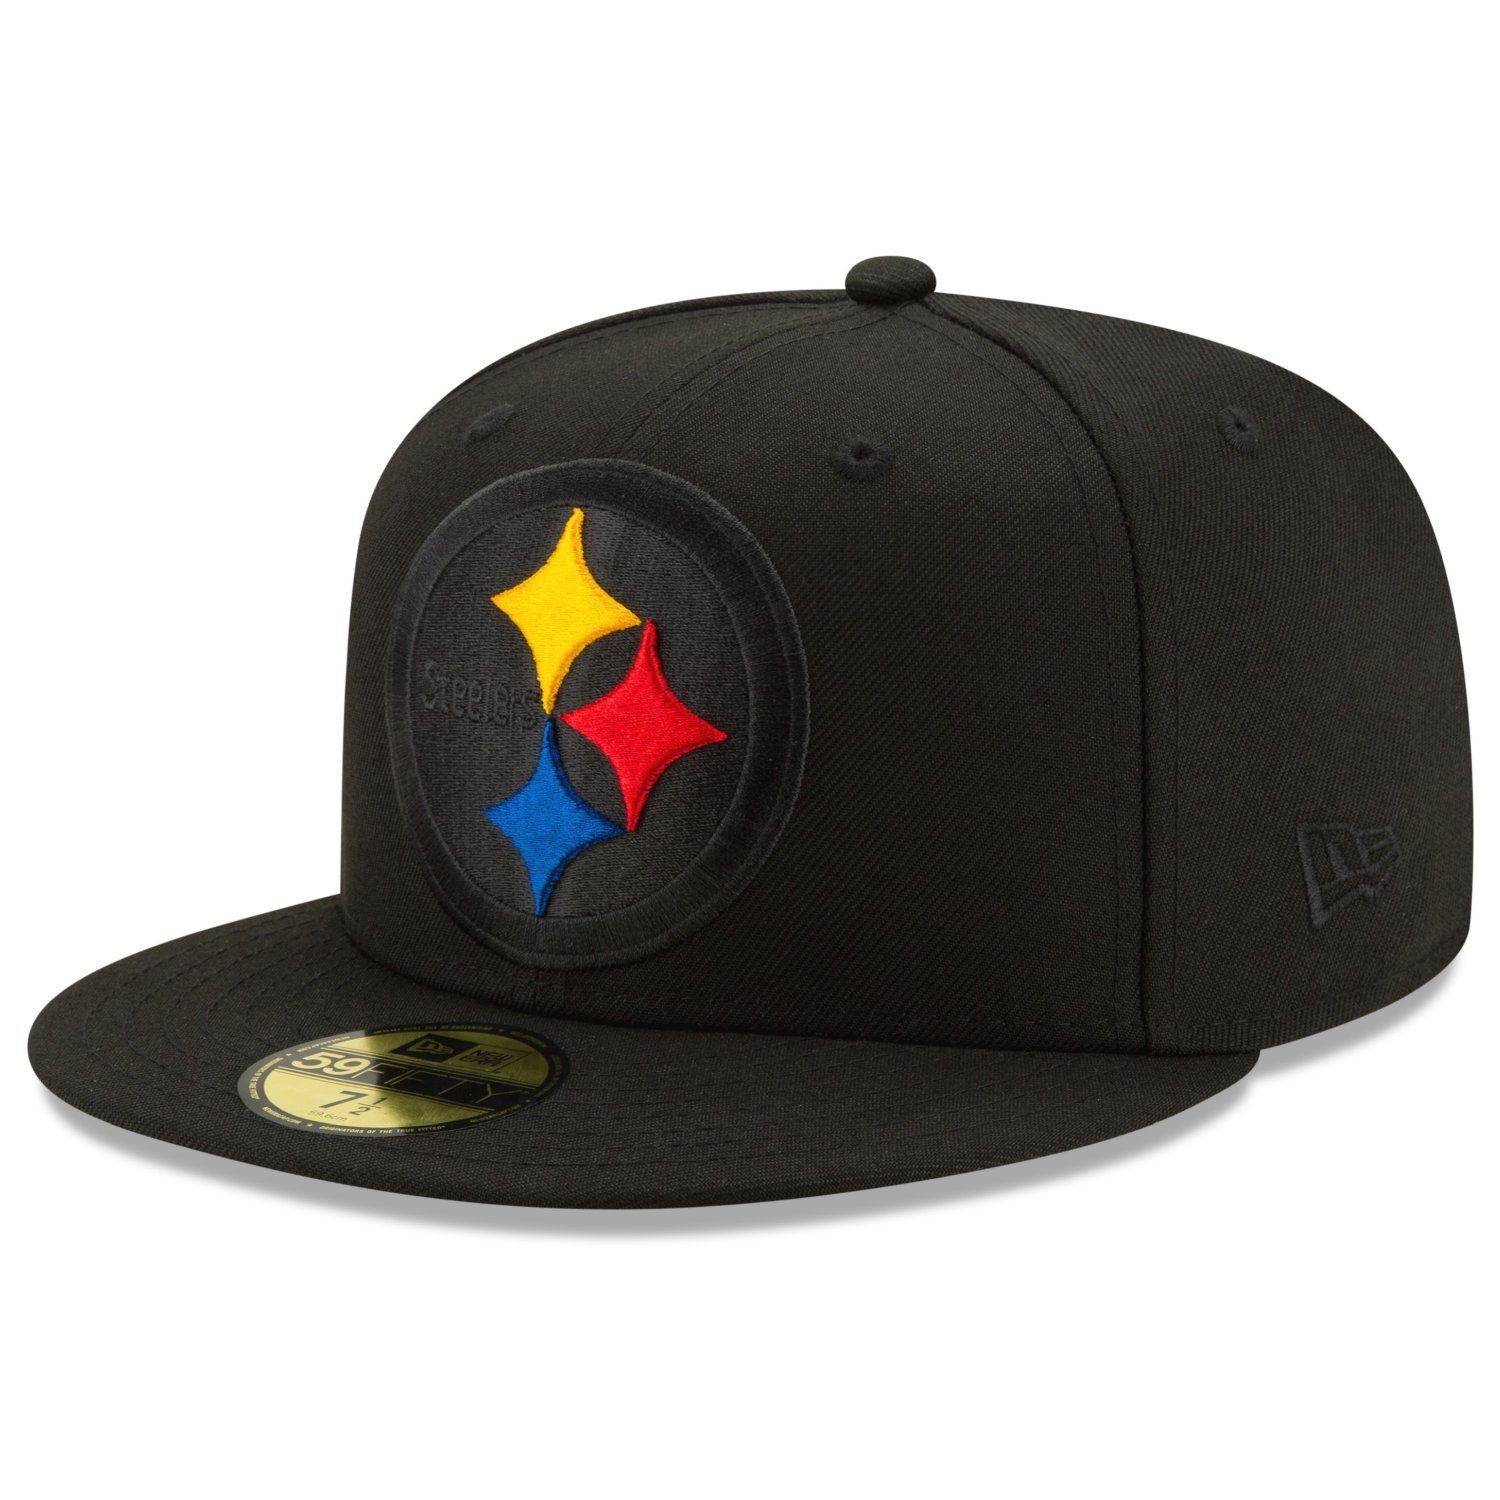 New Era Fitted Cap 59Fifty NFL ELEMENTS 2.0 Pittsburgh Steelers